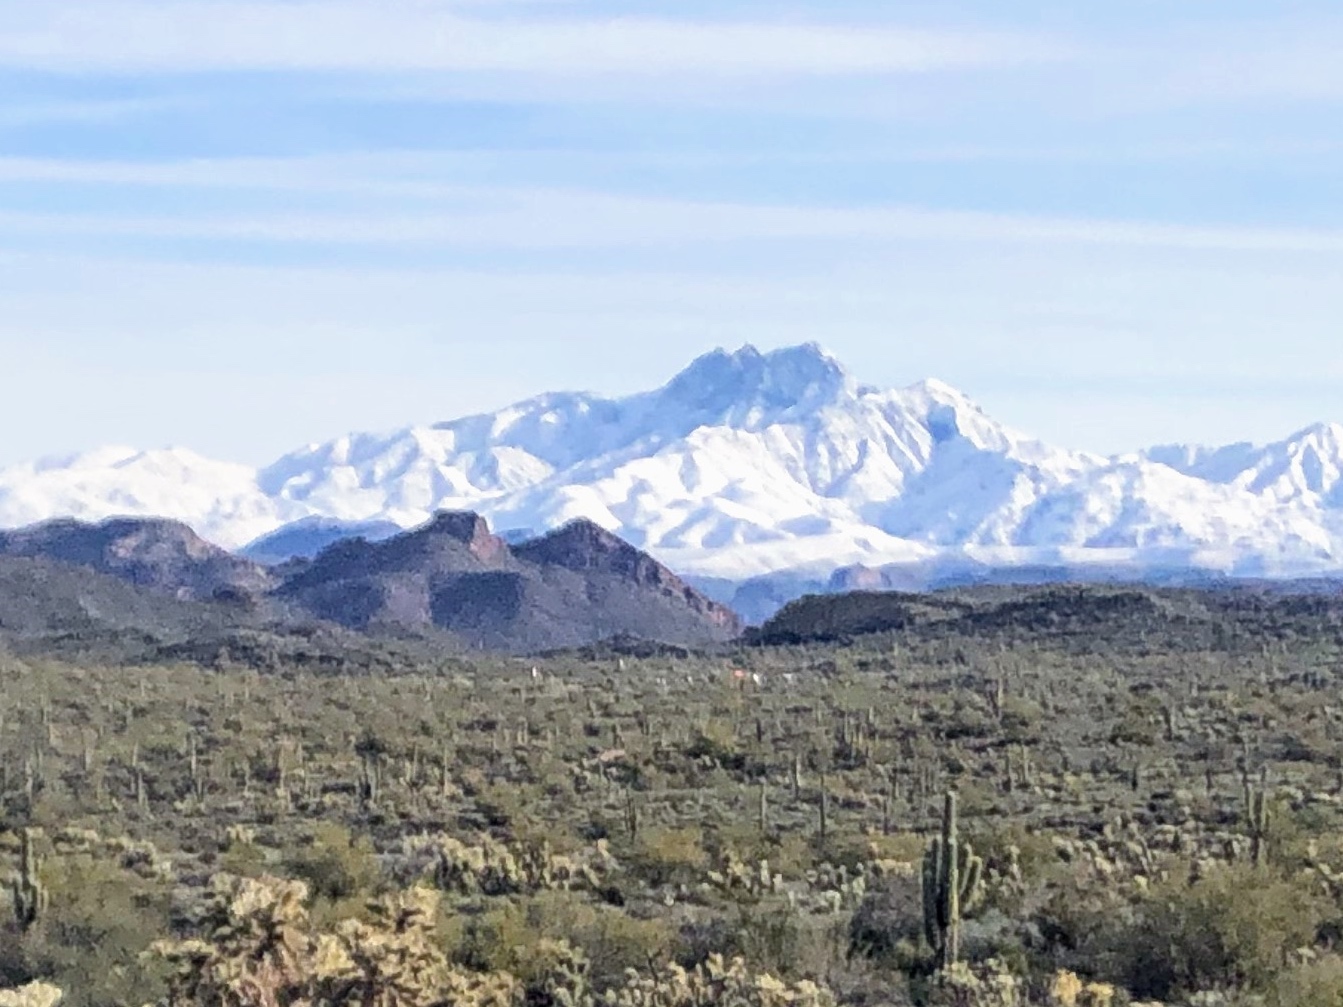 Snow capped Four Peaks Mountains